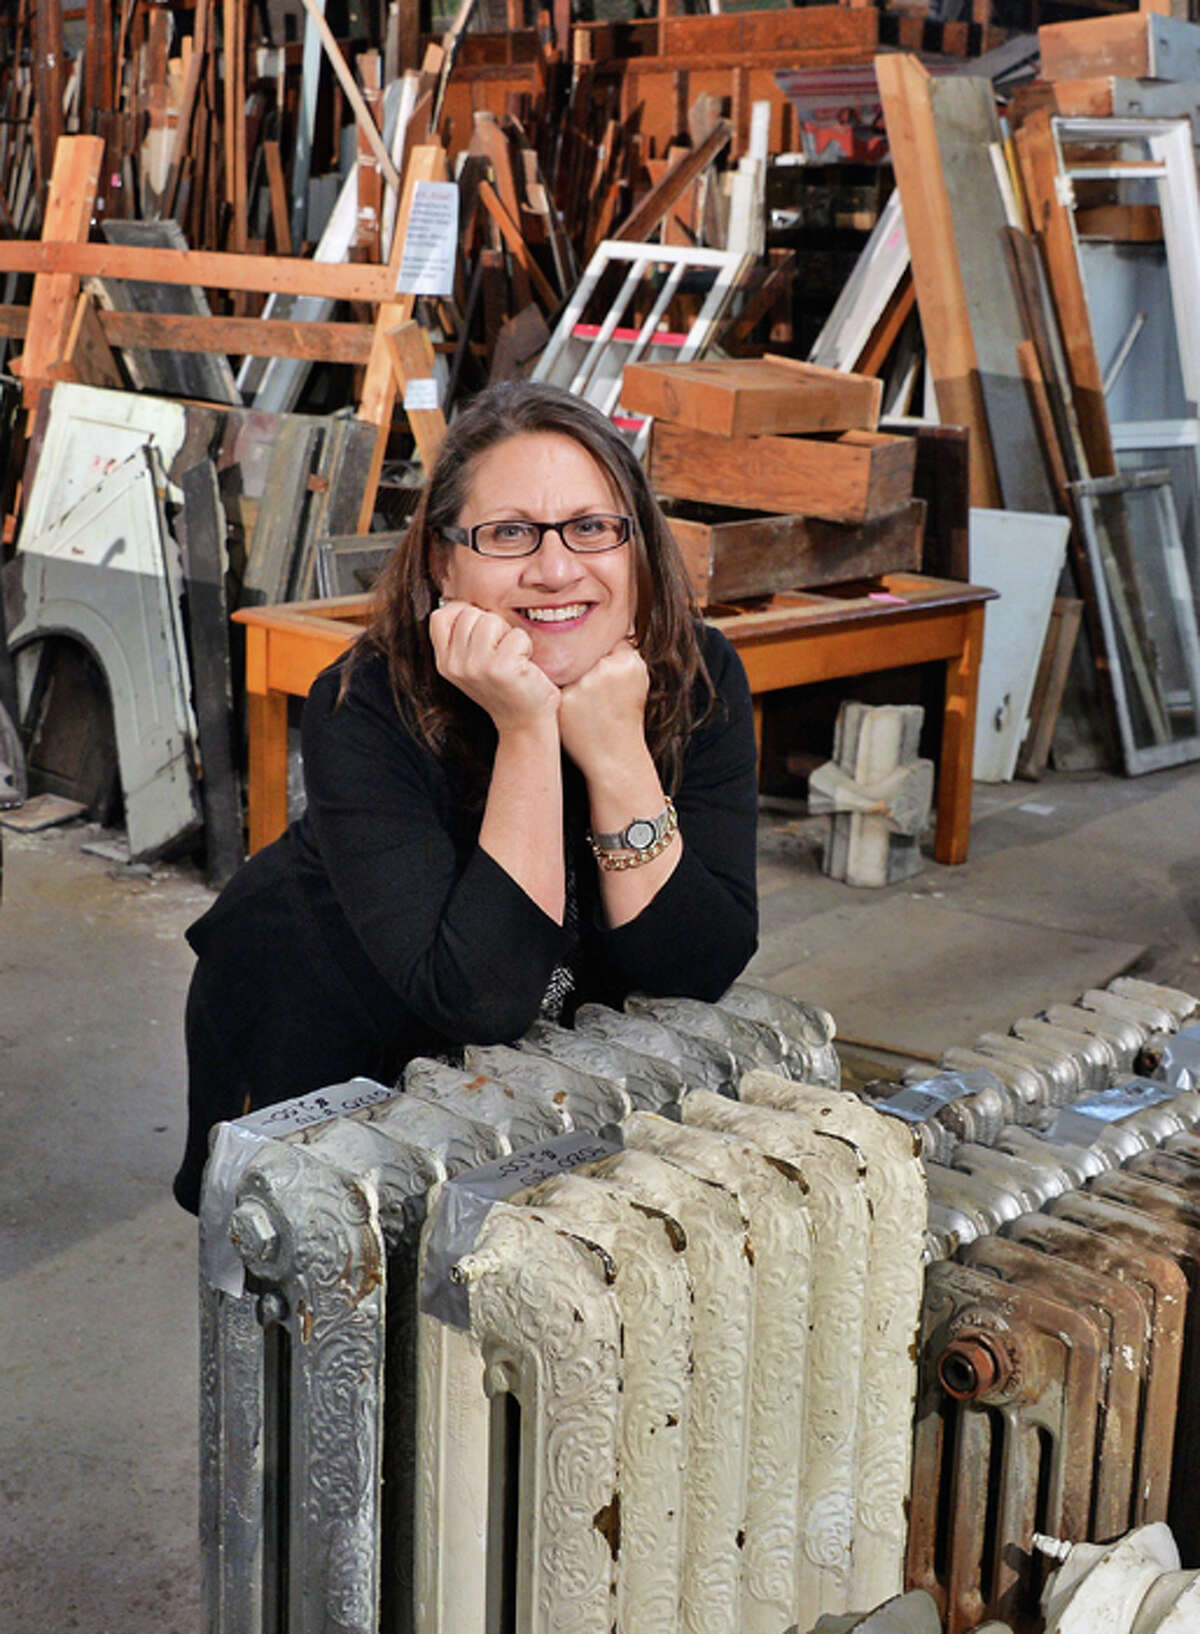 Executive director Susan Holland with cast iron steam and hot water radiators salvaged from the park South demolition now in Historic Albany Foundation's warehouse Tuesday Jan. 13, 2015, in Albany, NY.